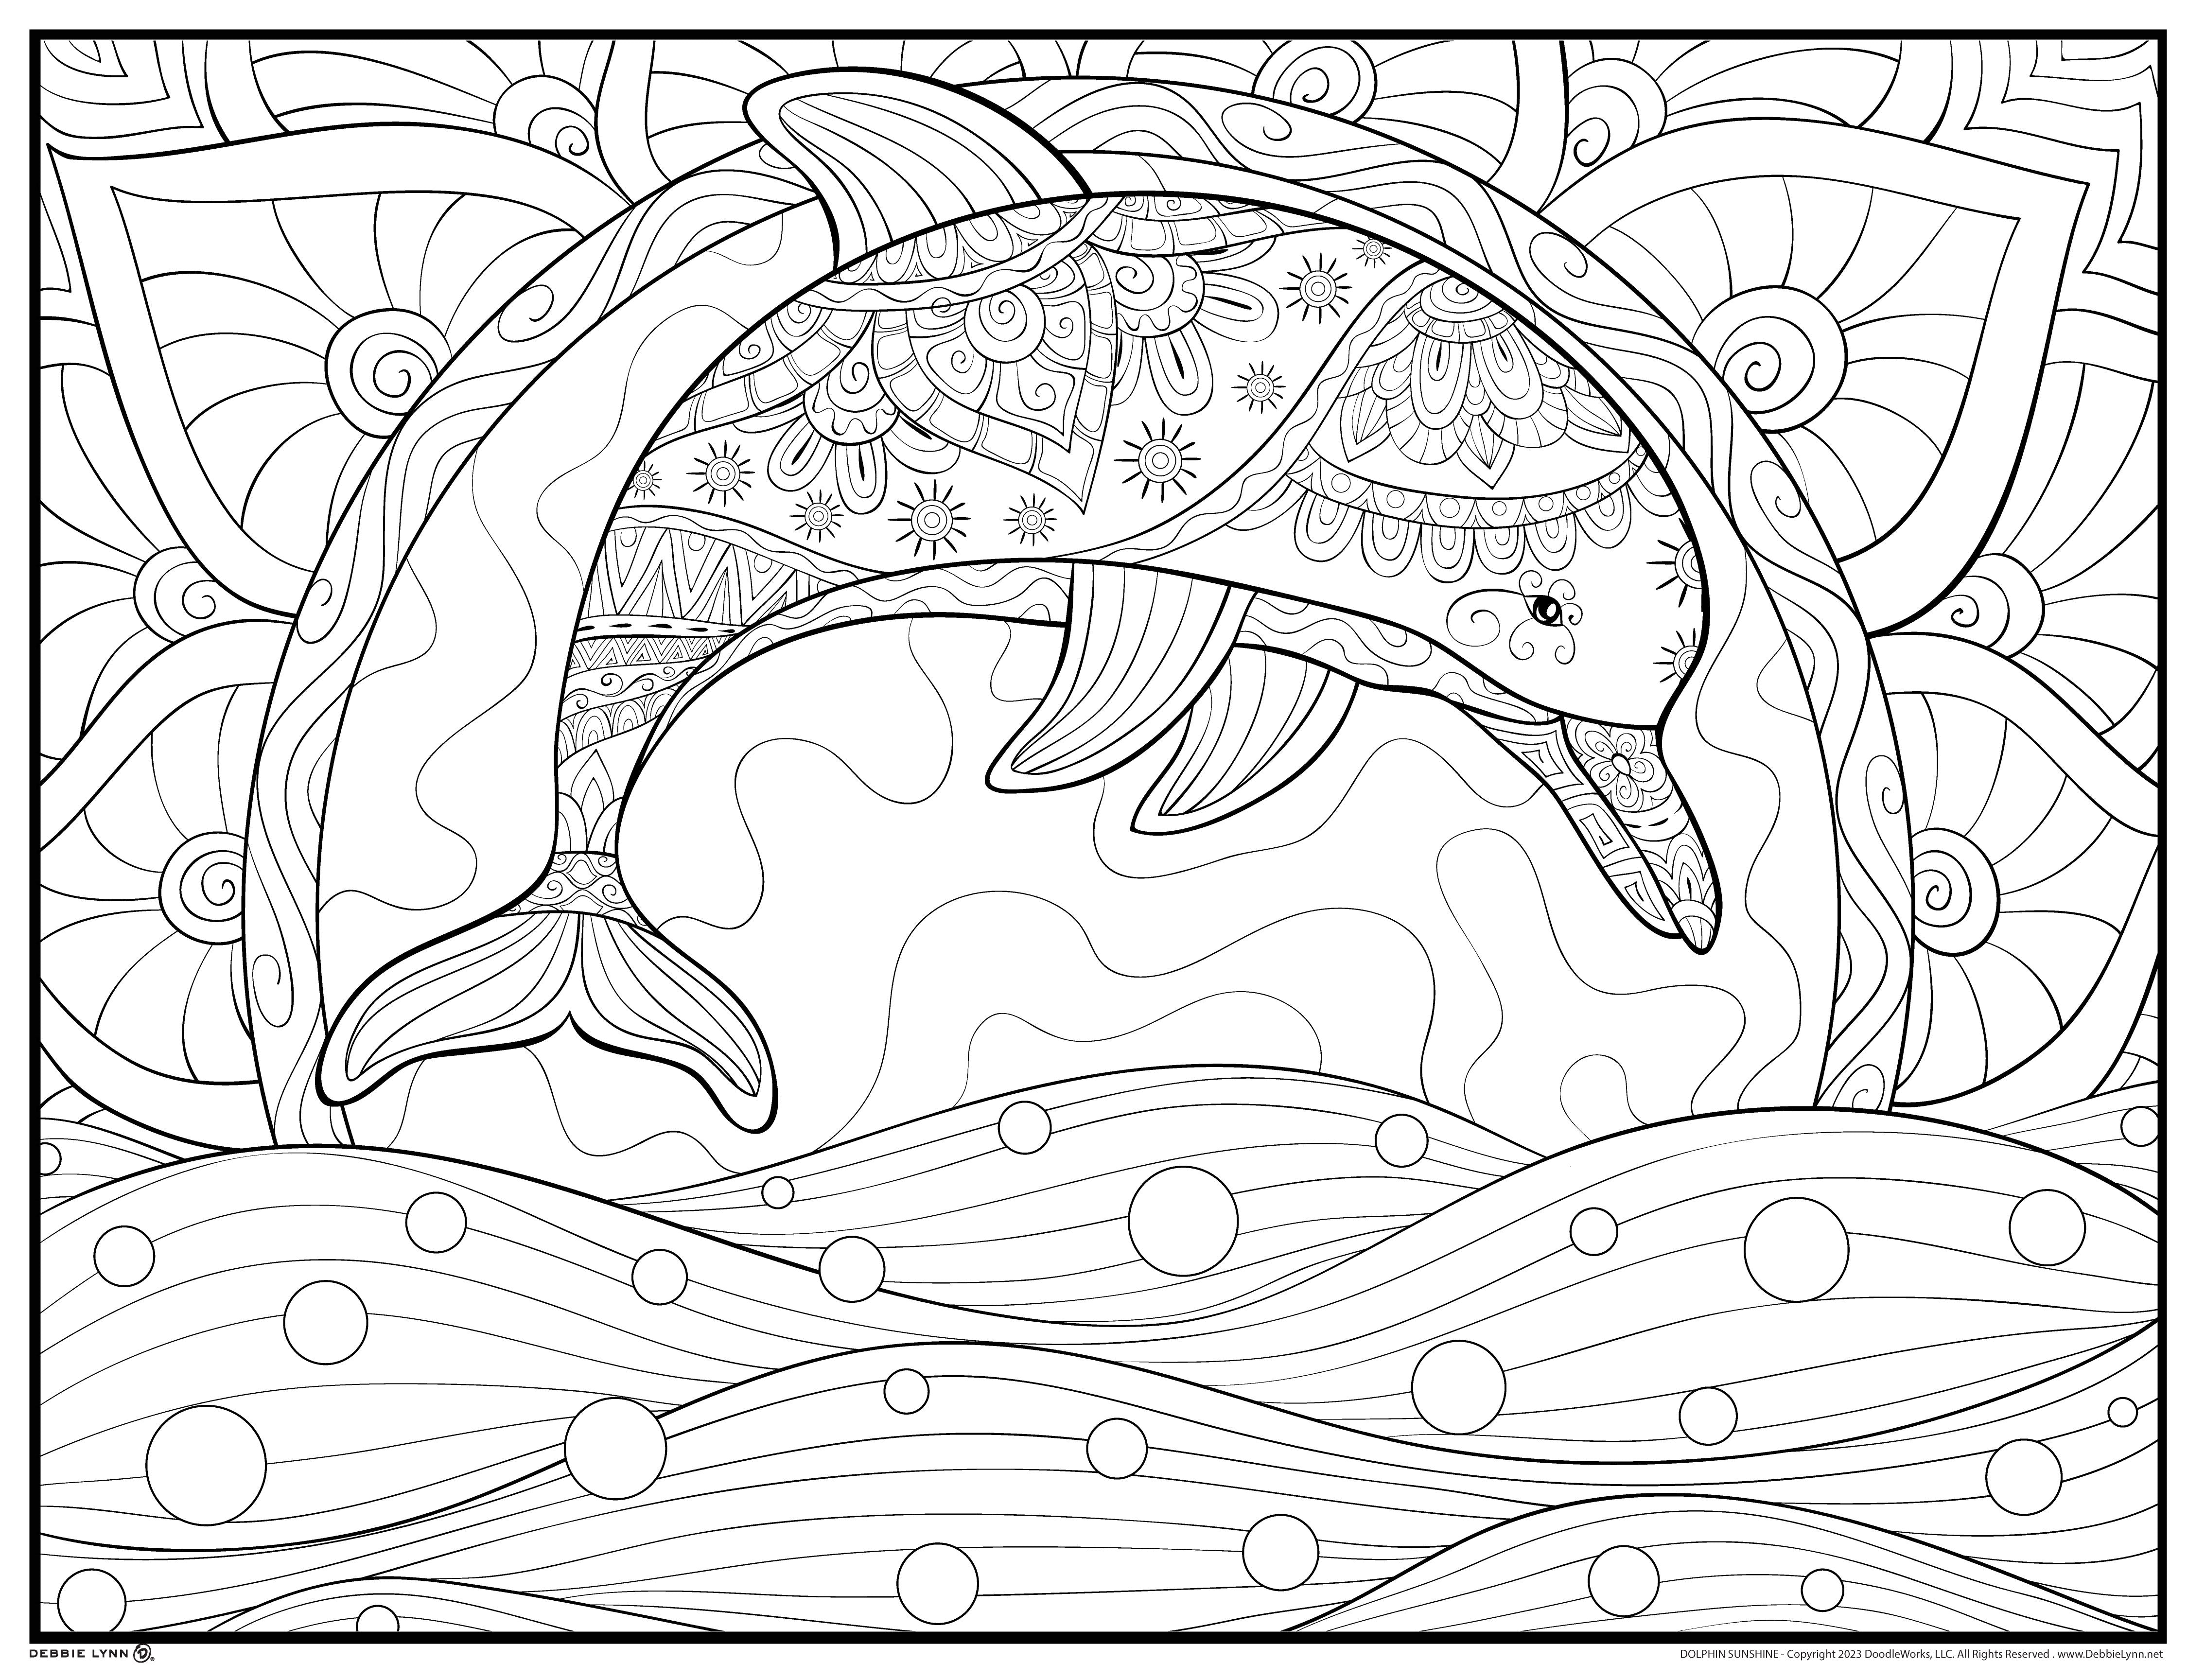 Dolphin sunshine personalized giant coloring poster x â debbie lynn